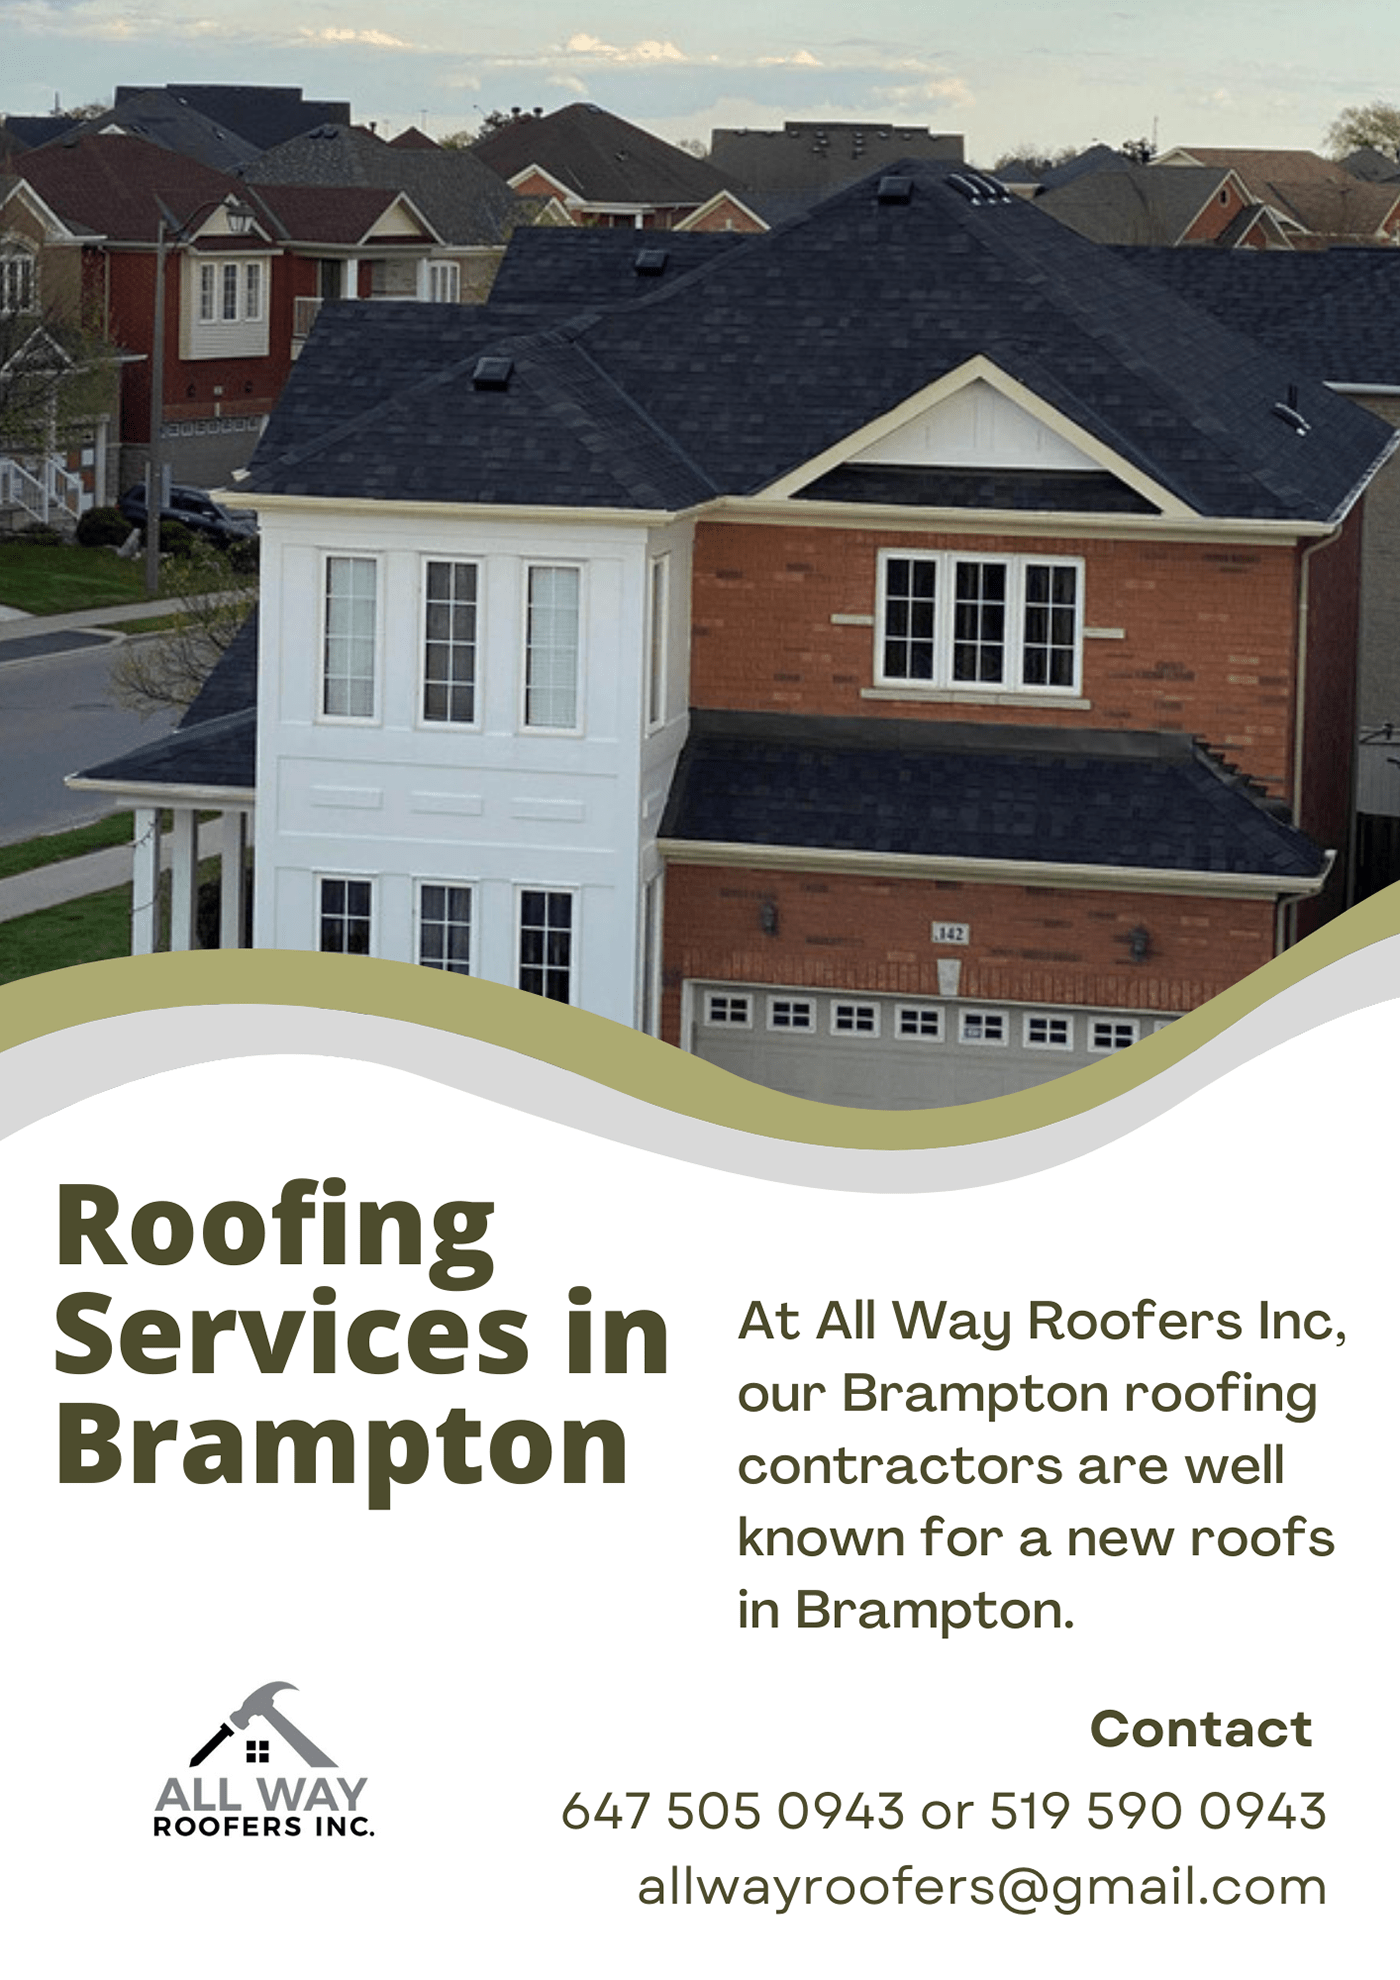 commercial roofing maintenance roof installation roof repair services Roofer Redding roofing brampton Roofing Construction Roofing services